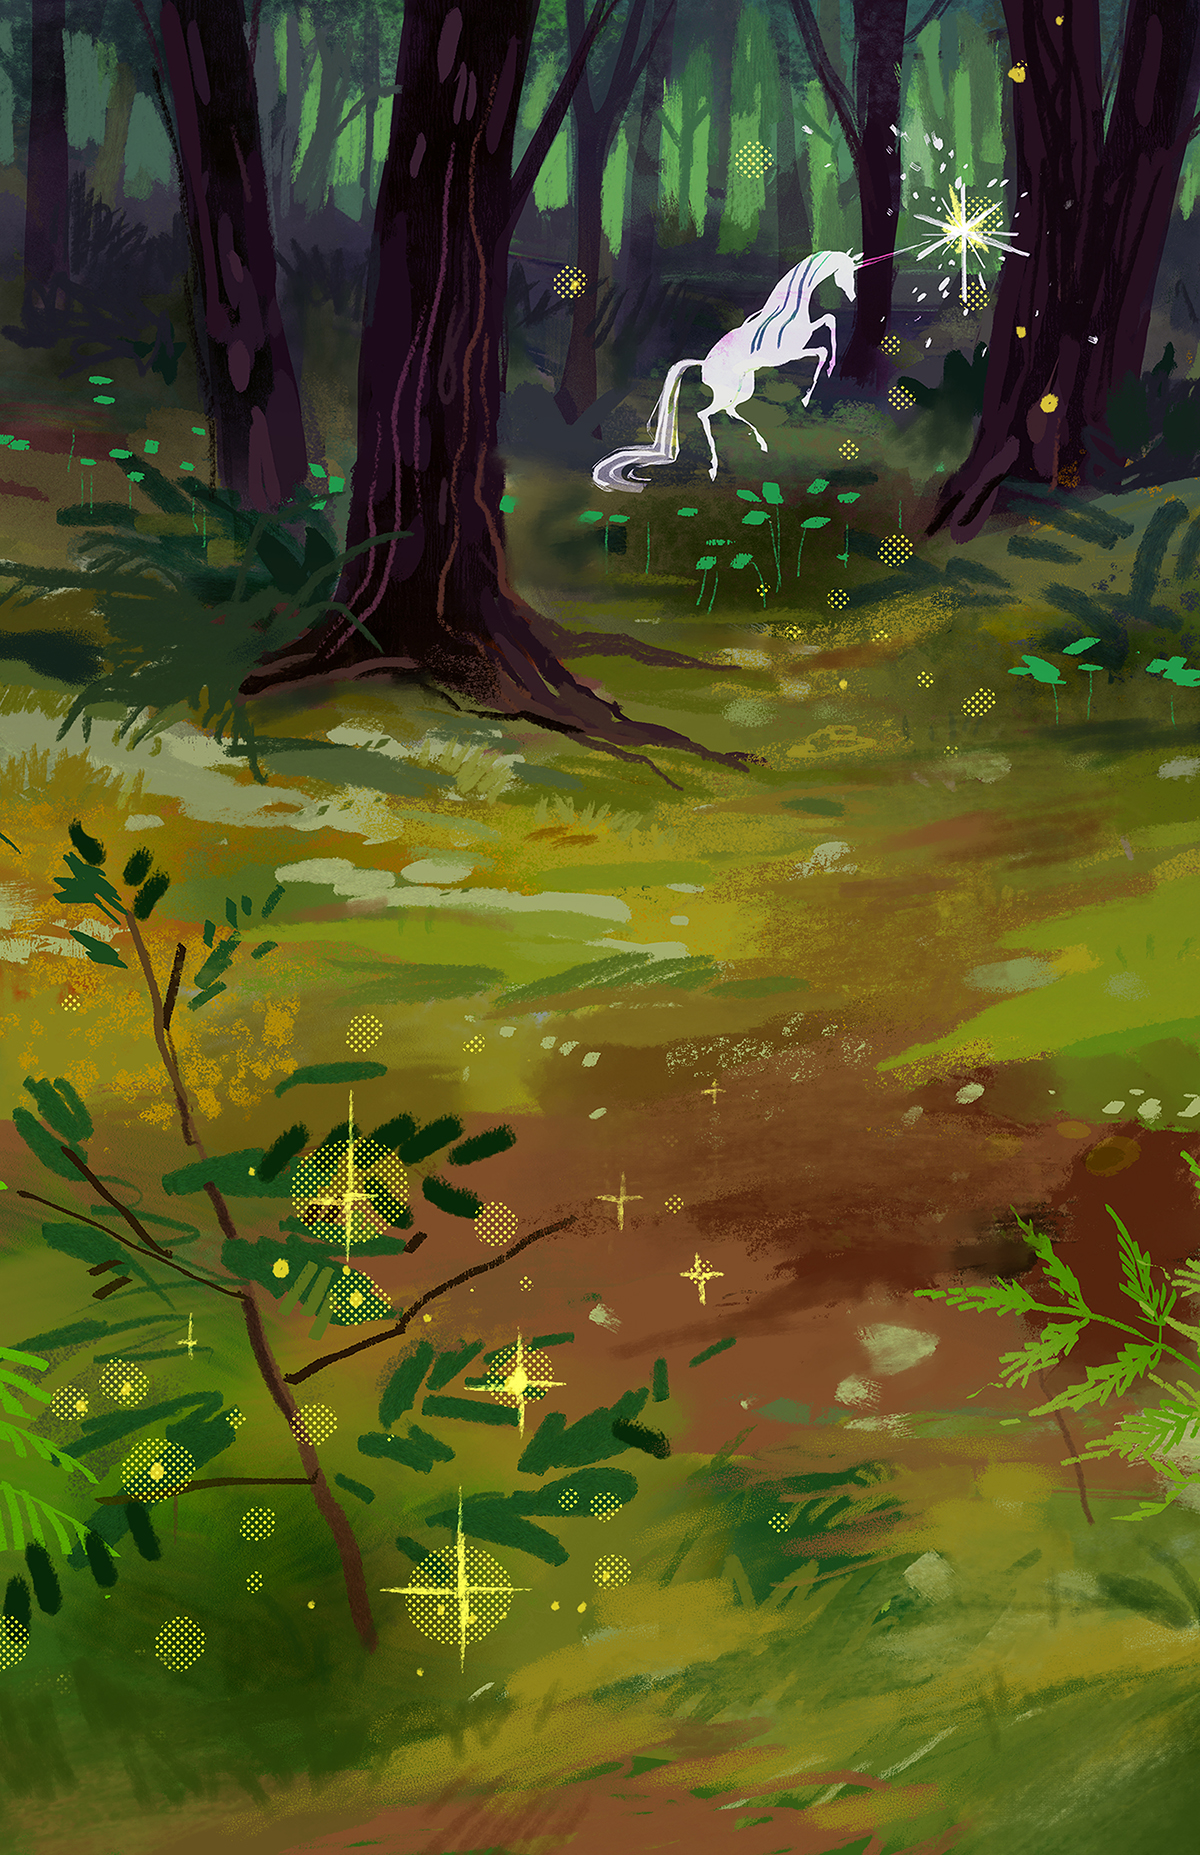 Illustration of dense forest scene with a bold white unicorn, small scale, in the background